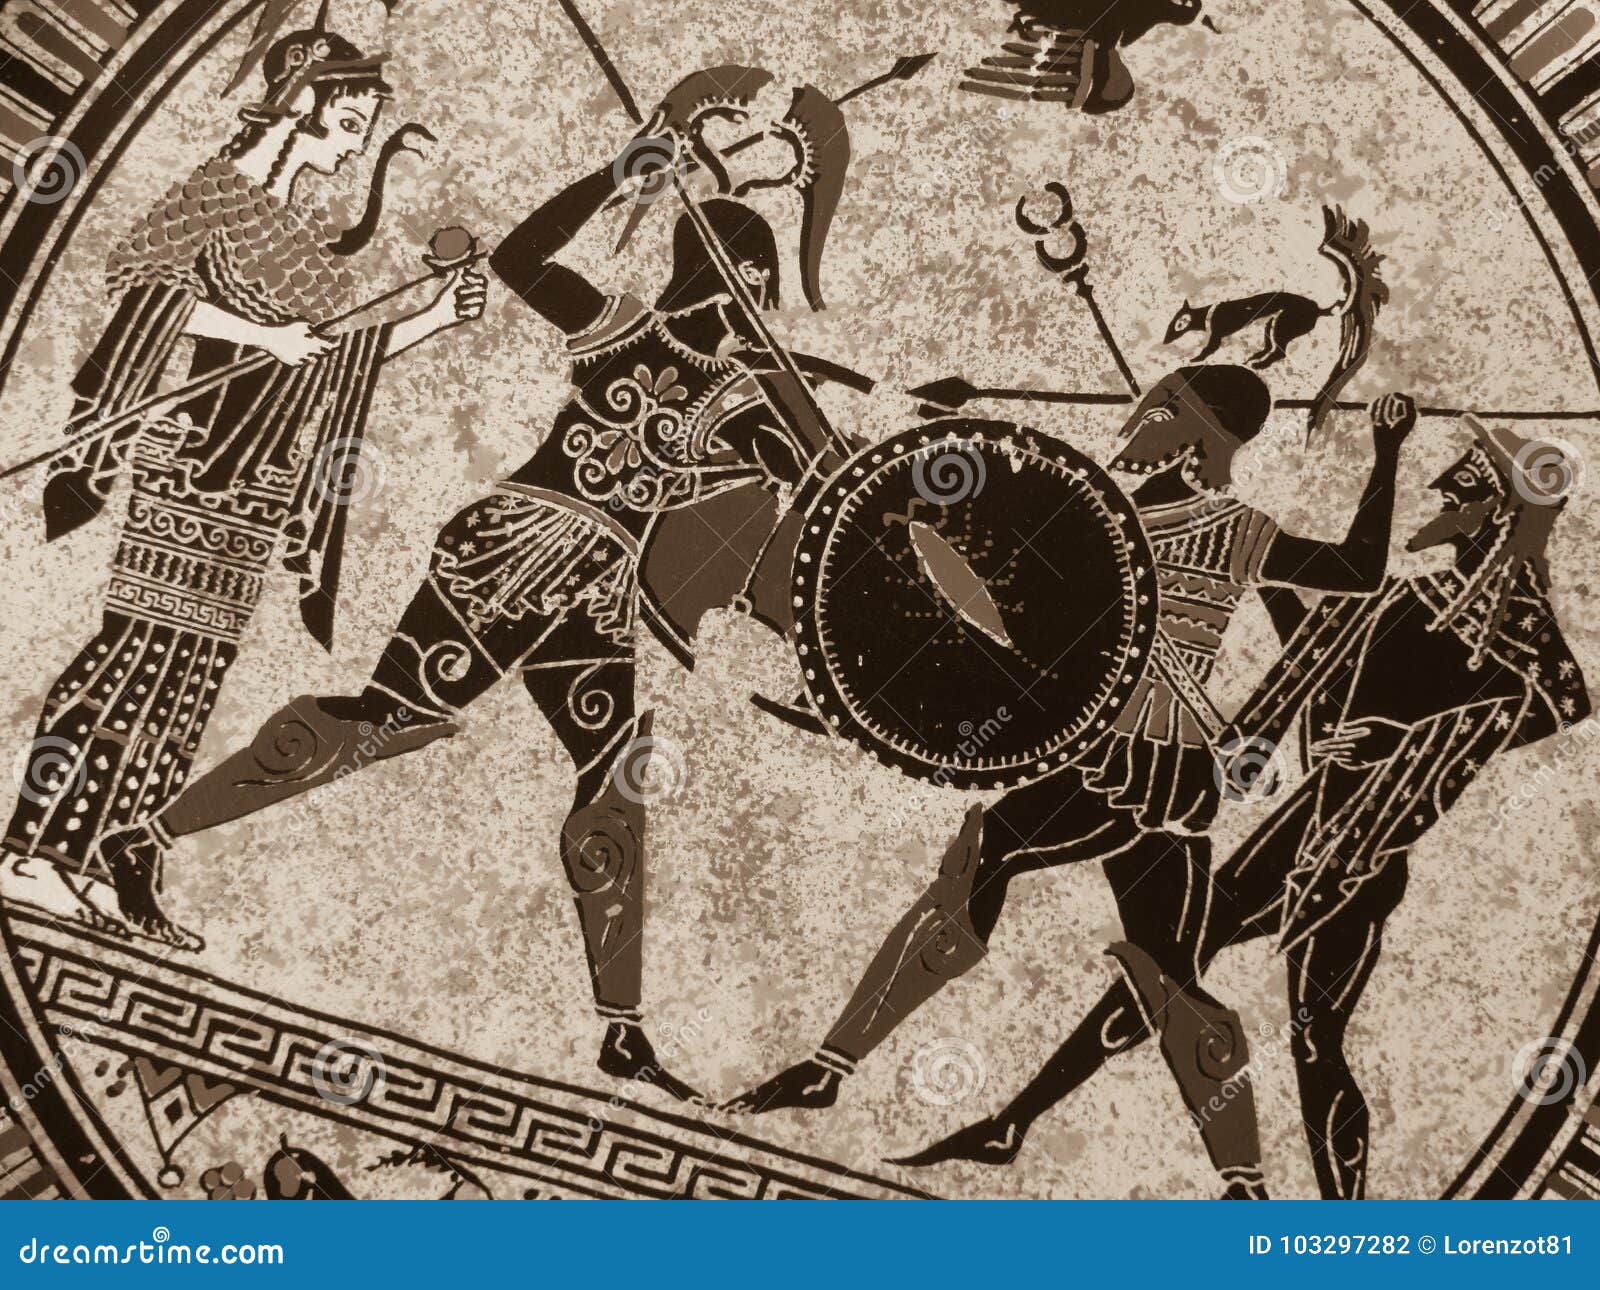 detail from an old historical greek paint over a dish. mythical heroes and gods fighting on it